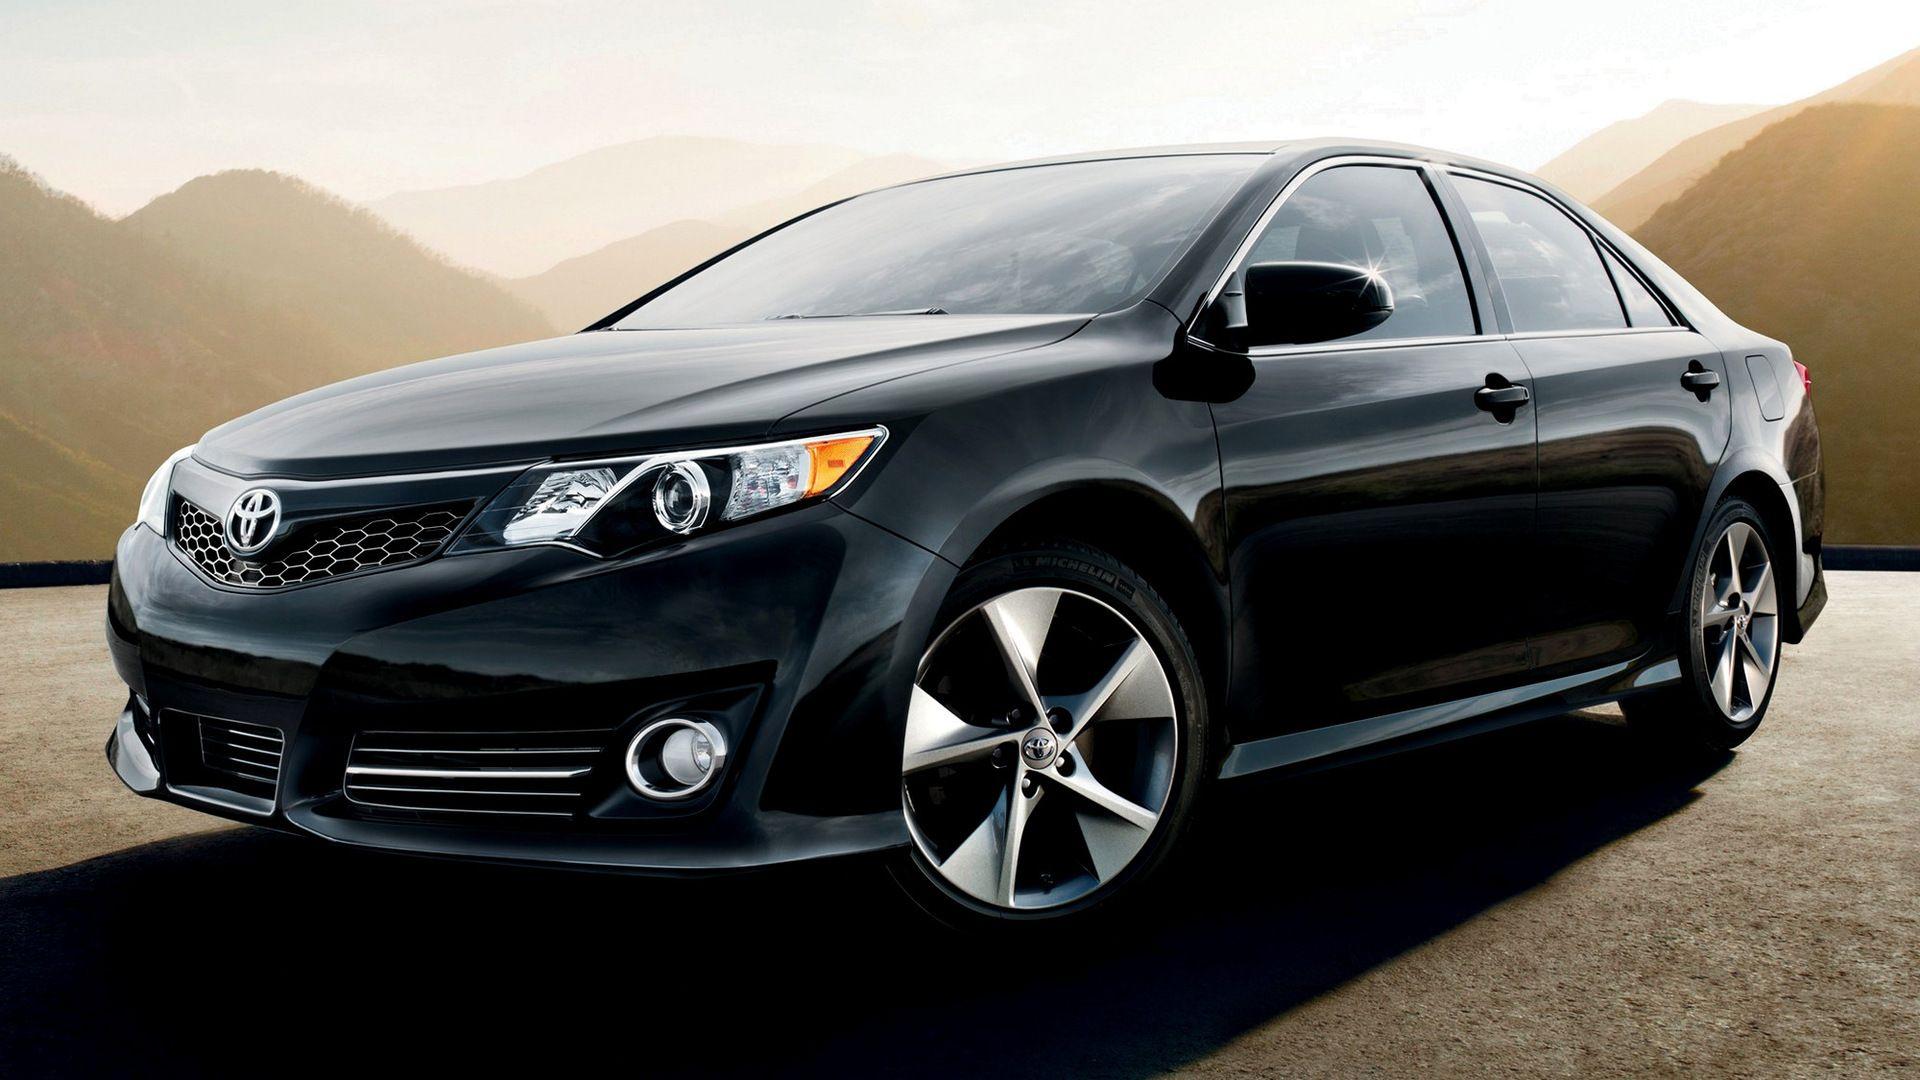 Toyota Camry SE (2011) Wallpaper and HD Image